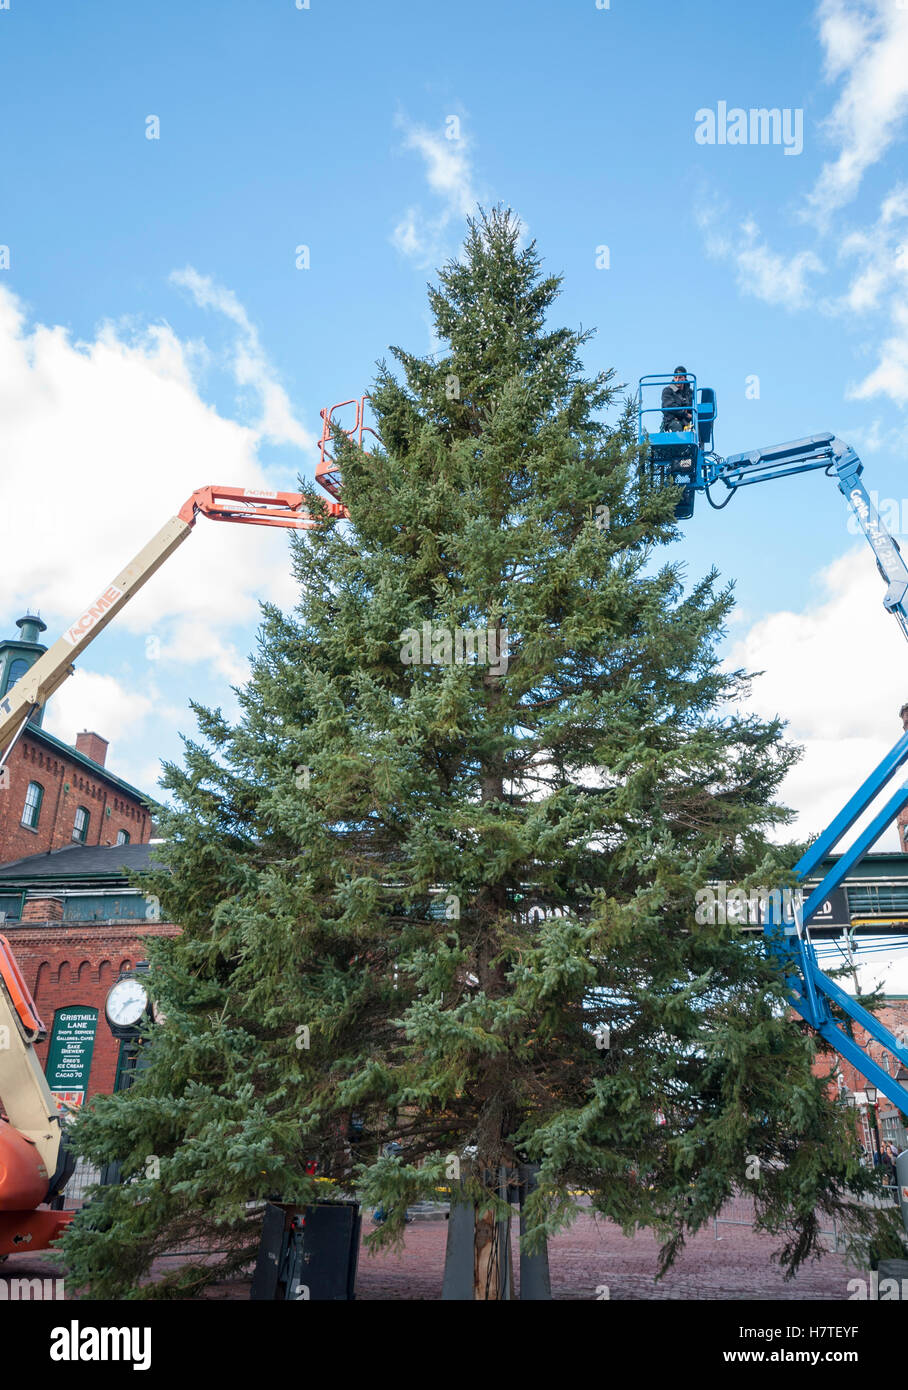 Workers using elevated platforms to decorate the 52 foot spruce Christmas tree on display in the Distillery area of Toronto Stock Photo